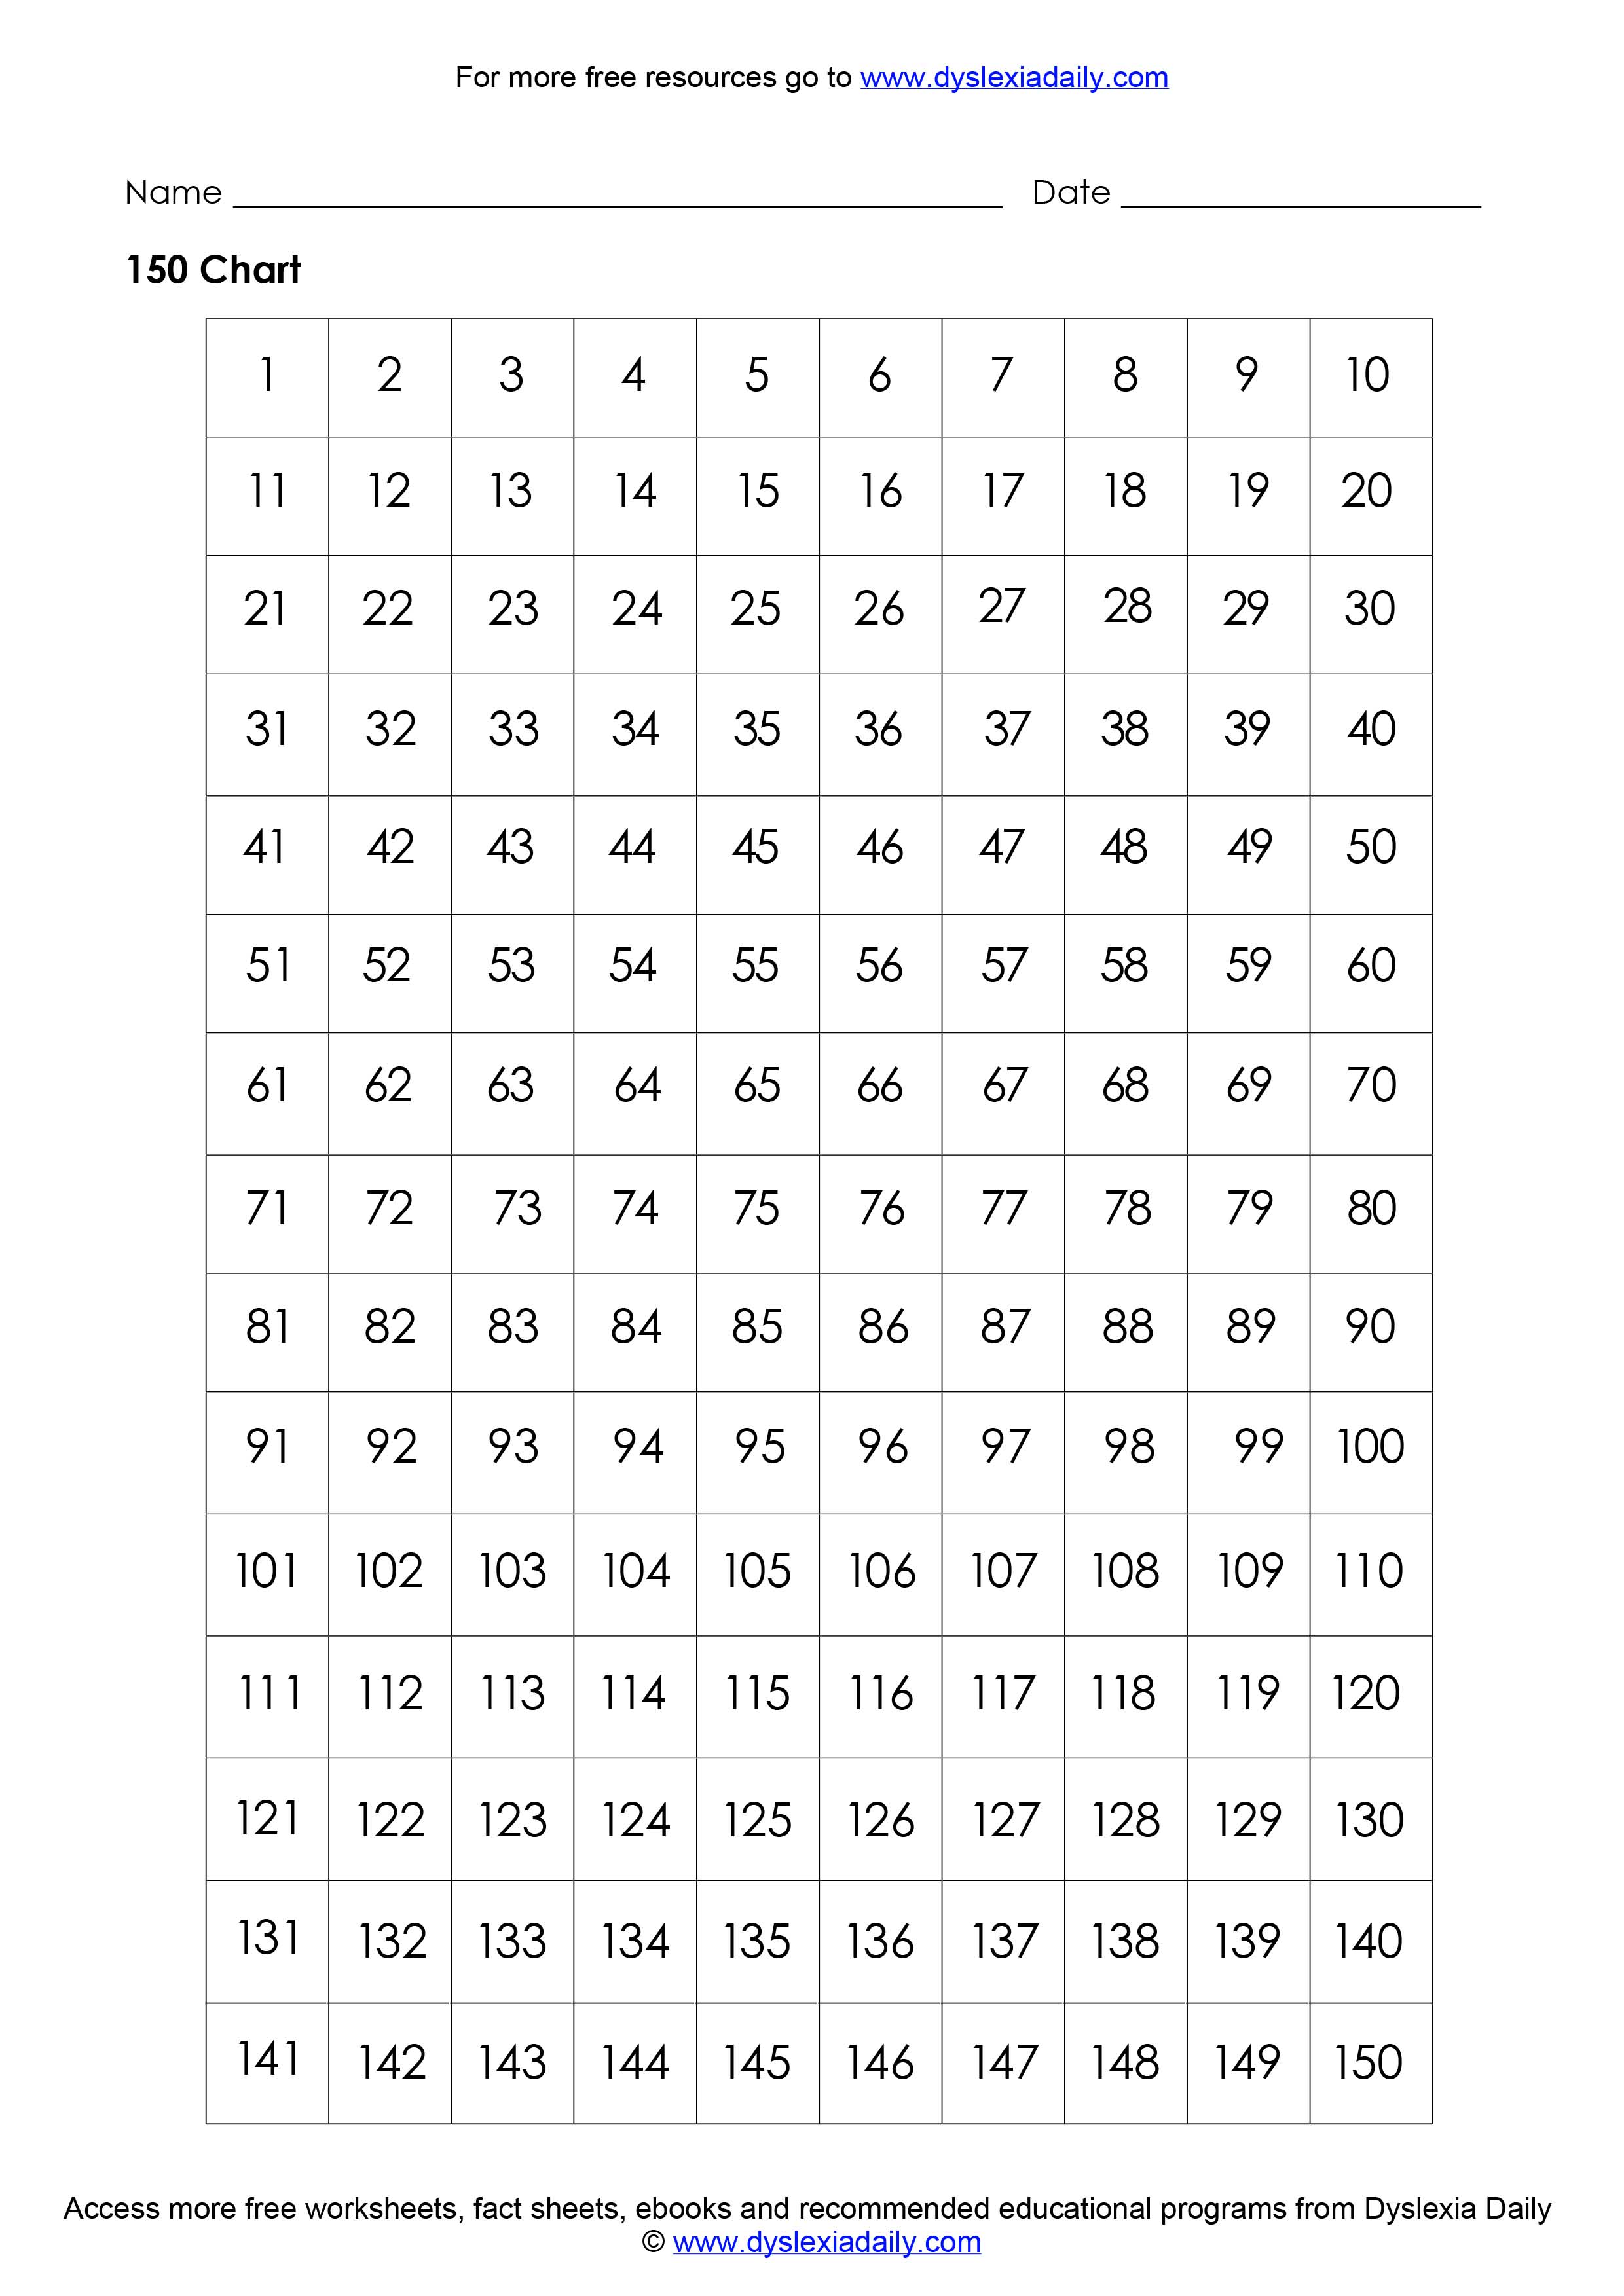 multiplication-table-1-to-150-bruin-blog